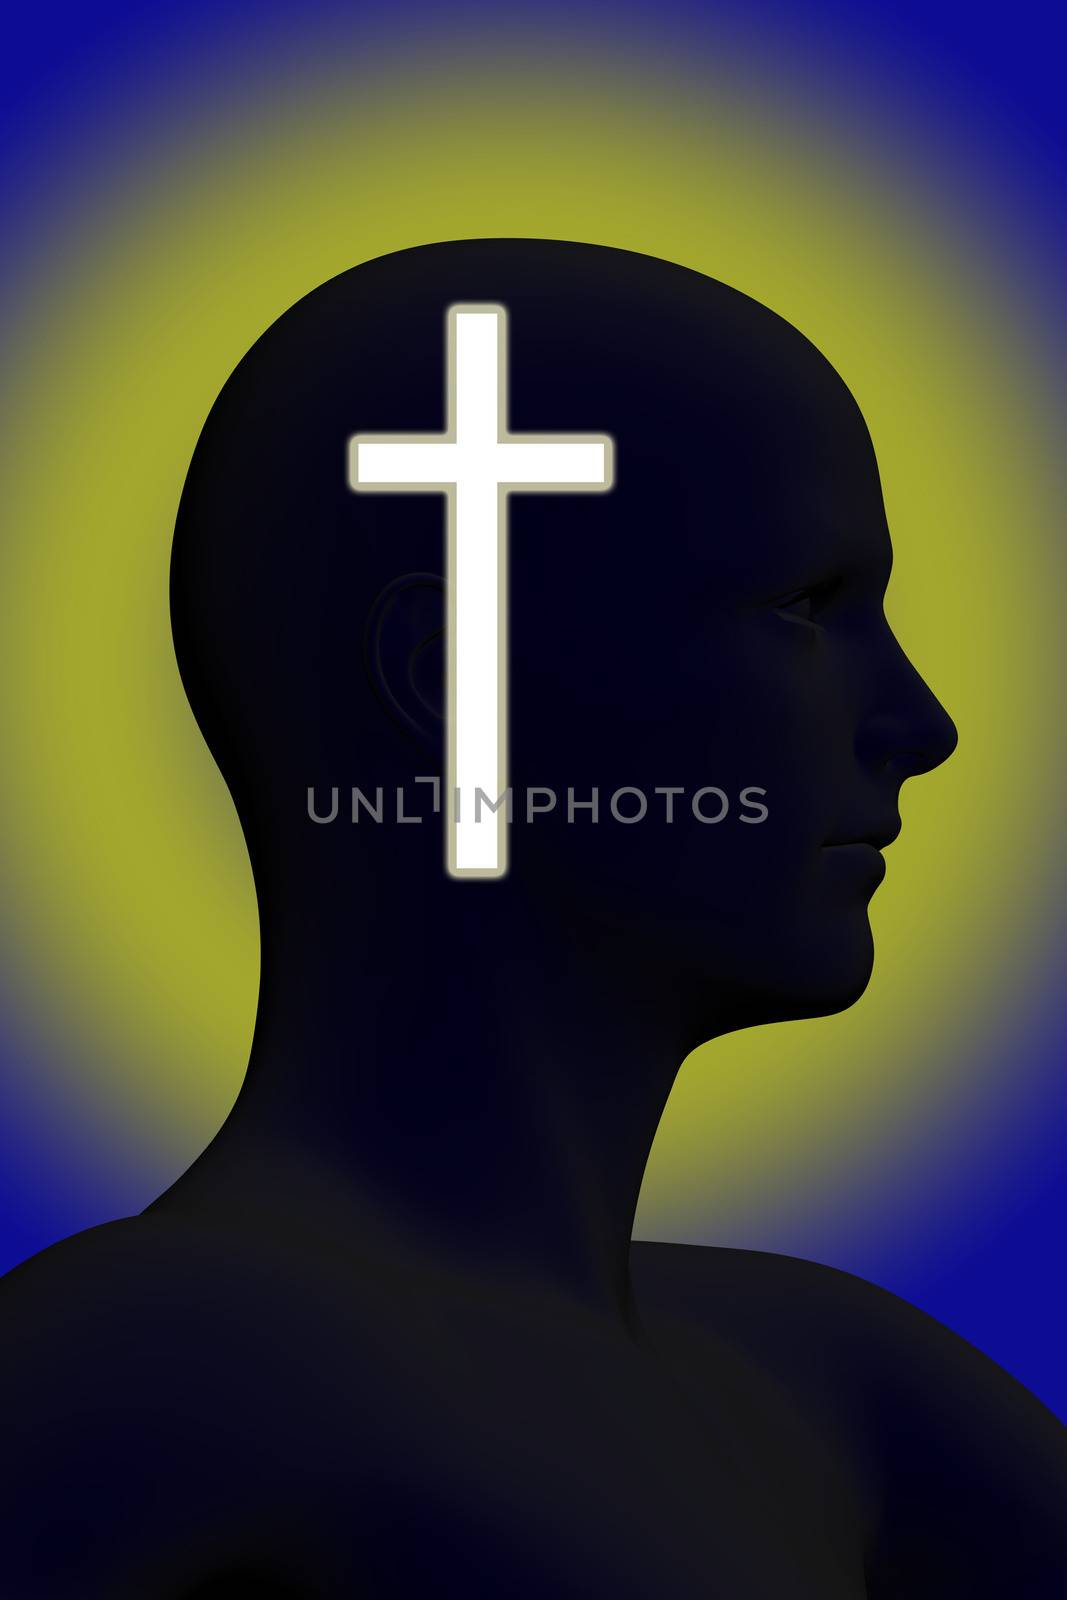 Silhouette of a mans head with glowing cross on it made in 3d software